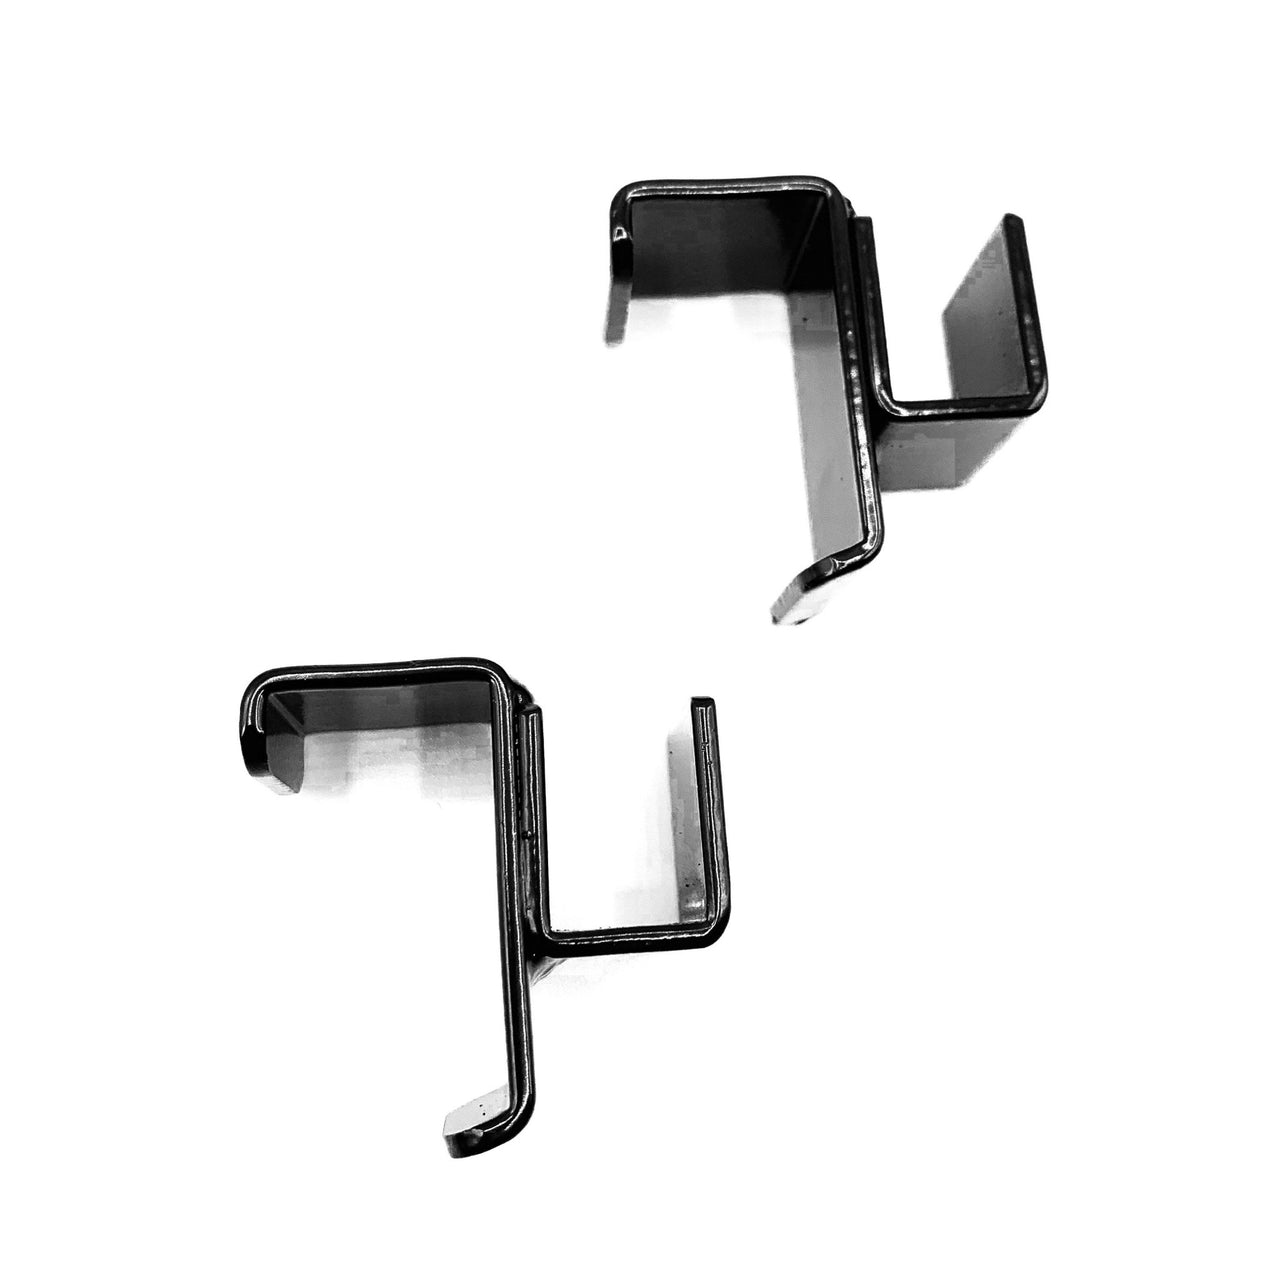 Trough Hooks for Hold It Mate mounting rail